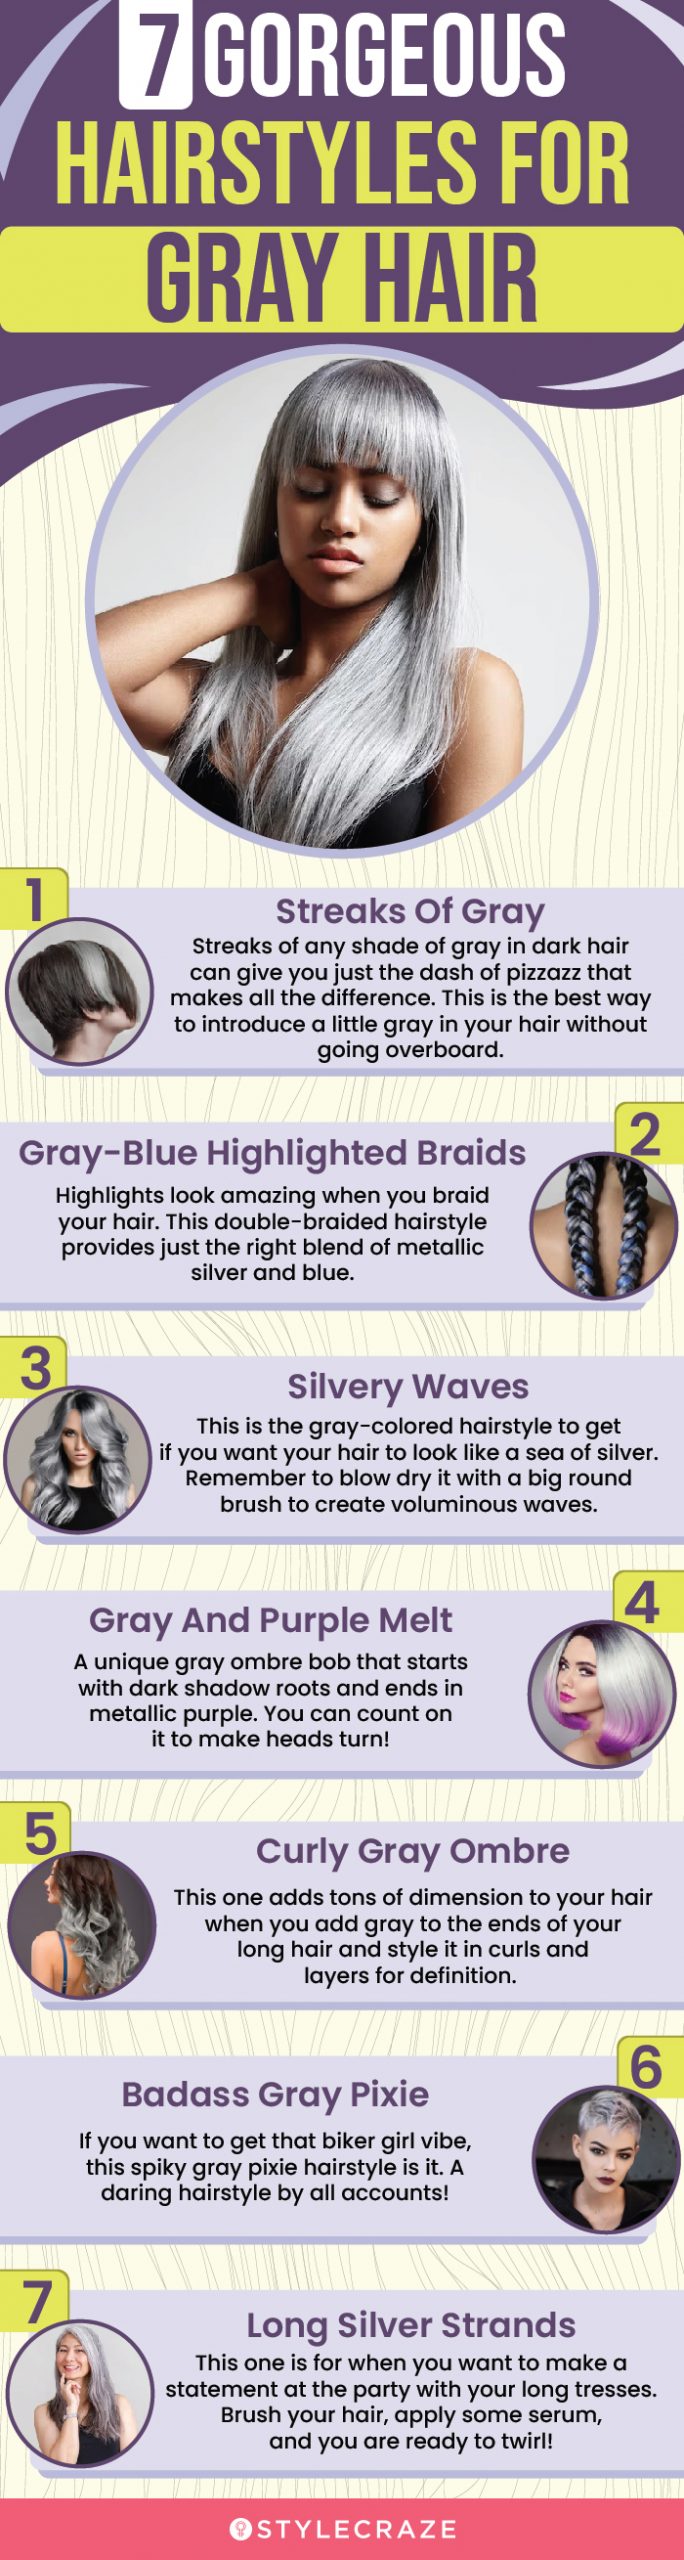 7 gorgeous hairstyles for gray hair (infographic)